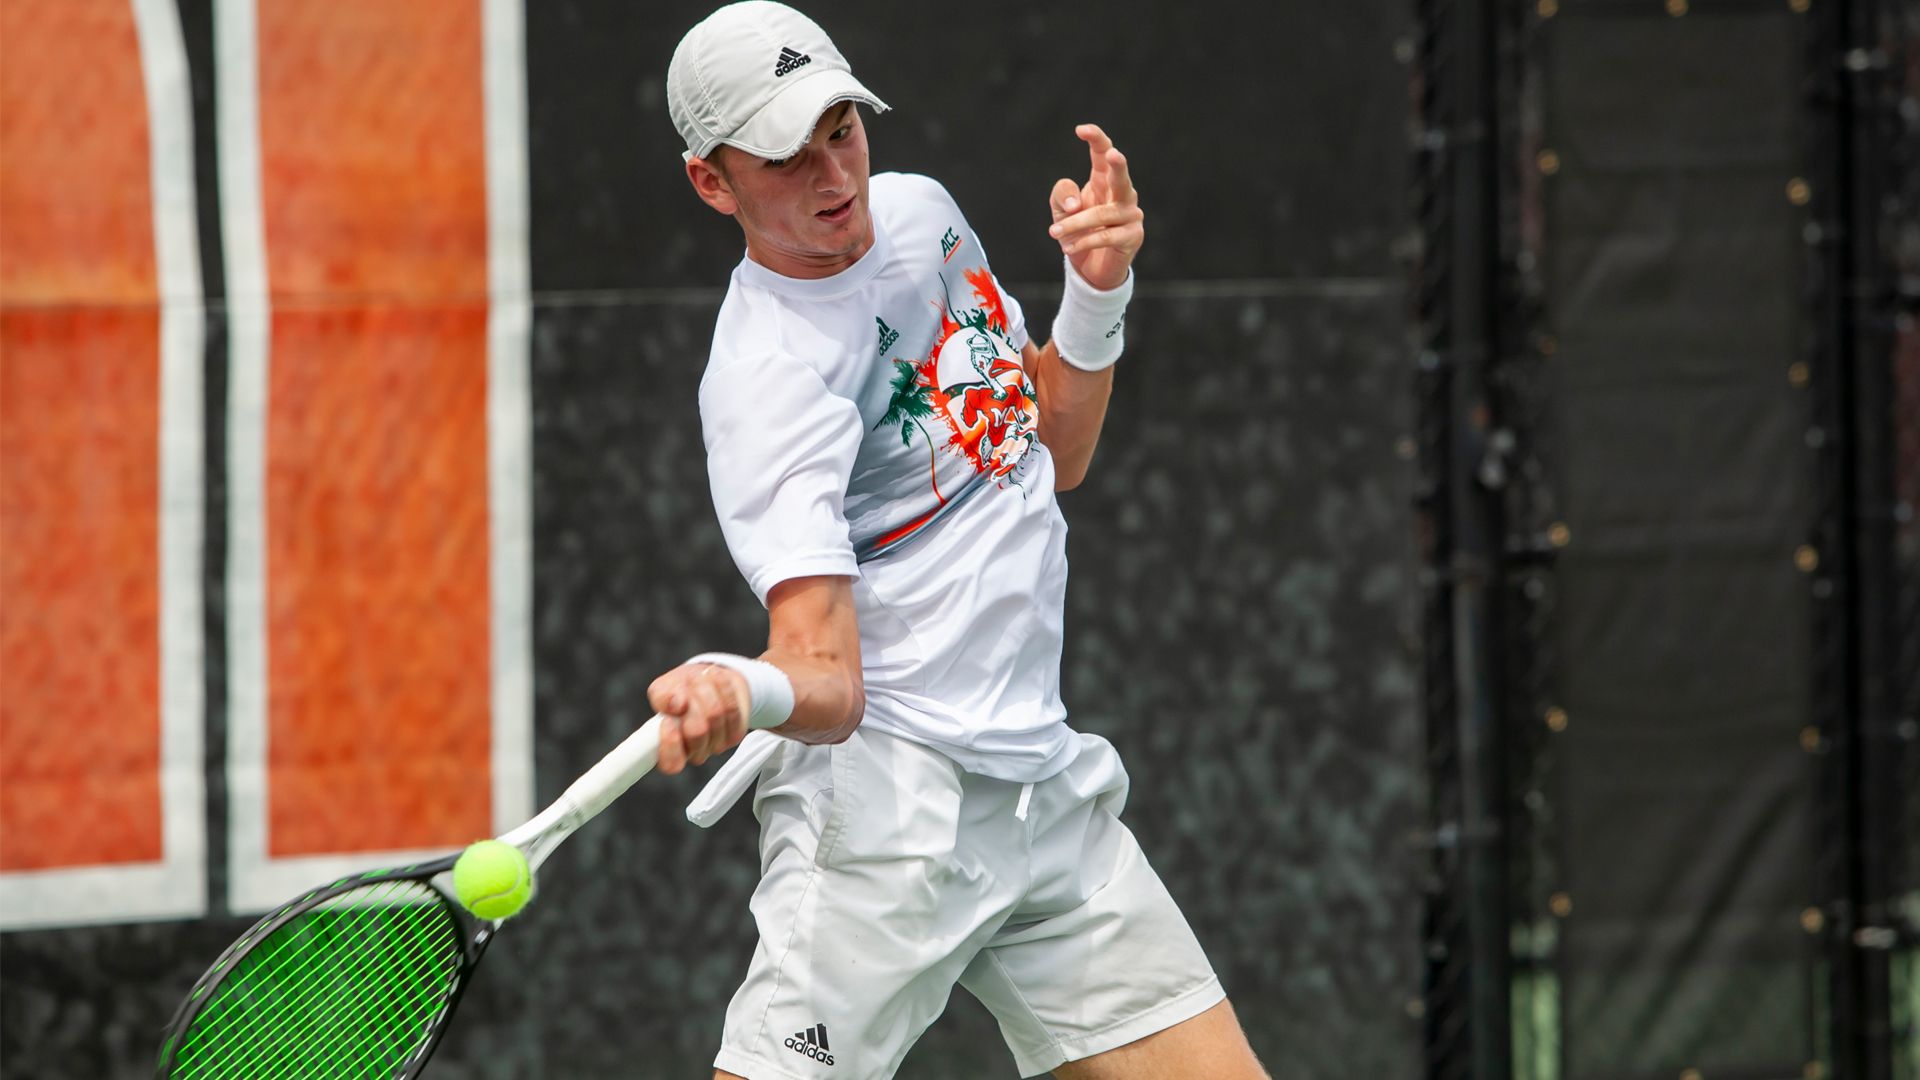 Miami Falls at Fourth-Ranked Wake Forest, 4-1